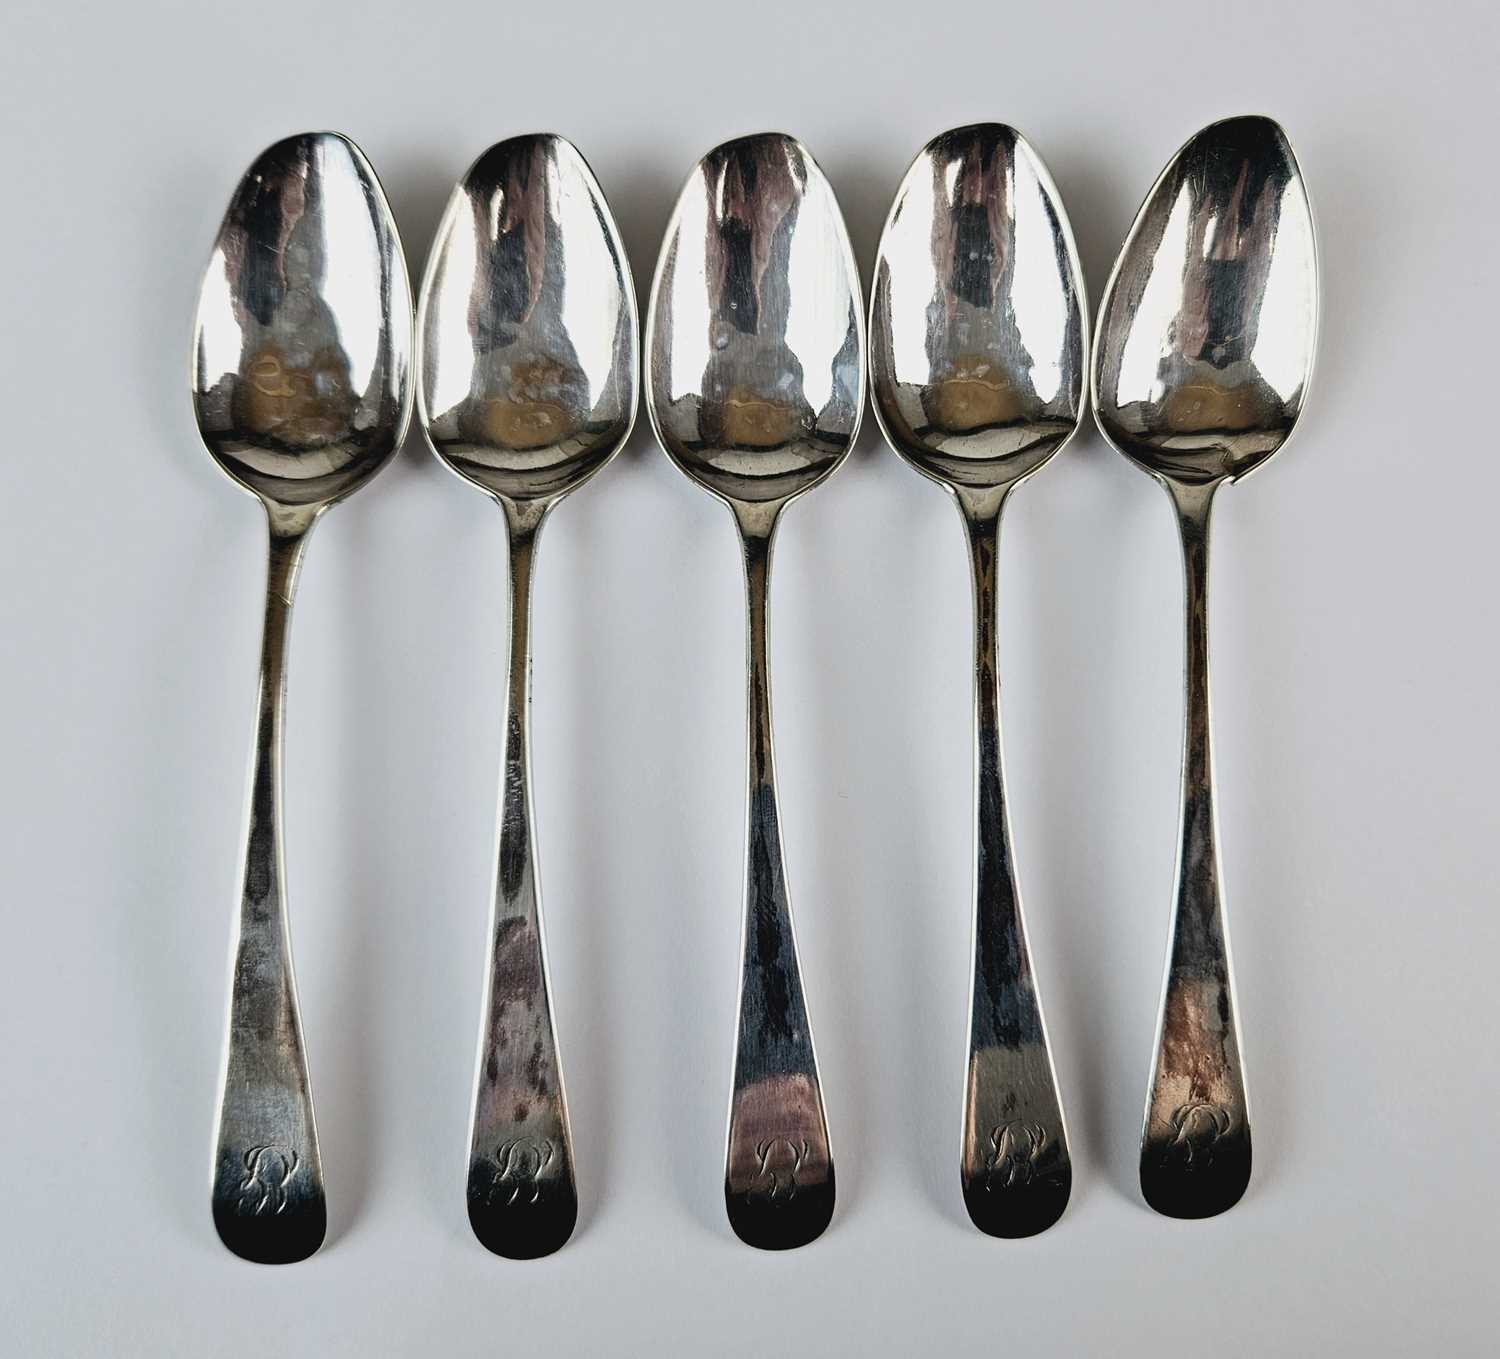 Lot 8 - Royal Navy - Set of five silver teaspoons with monogrammed initials for Captain Samuel Burgess